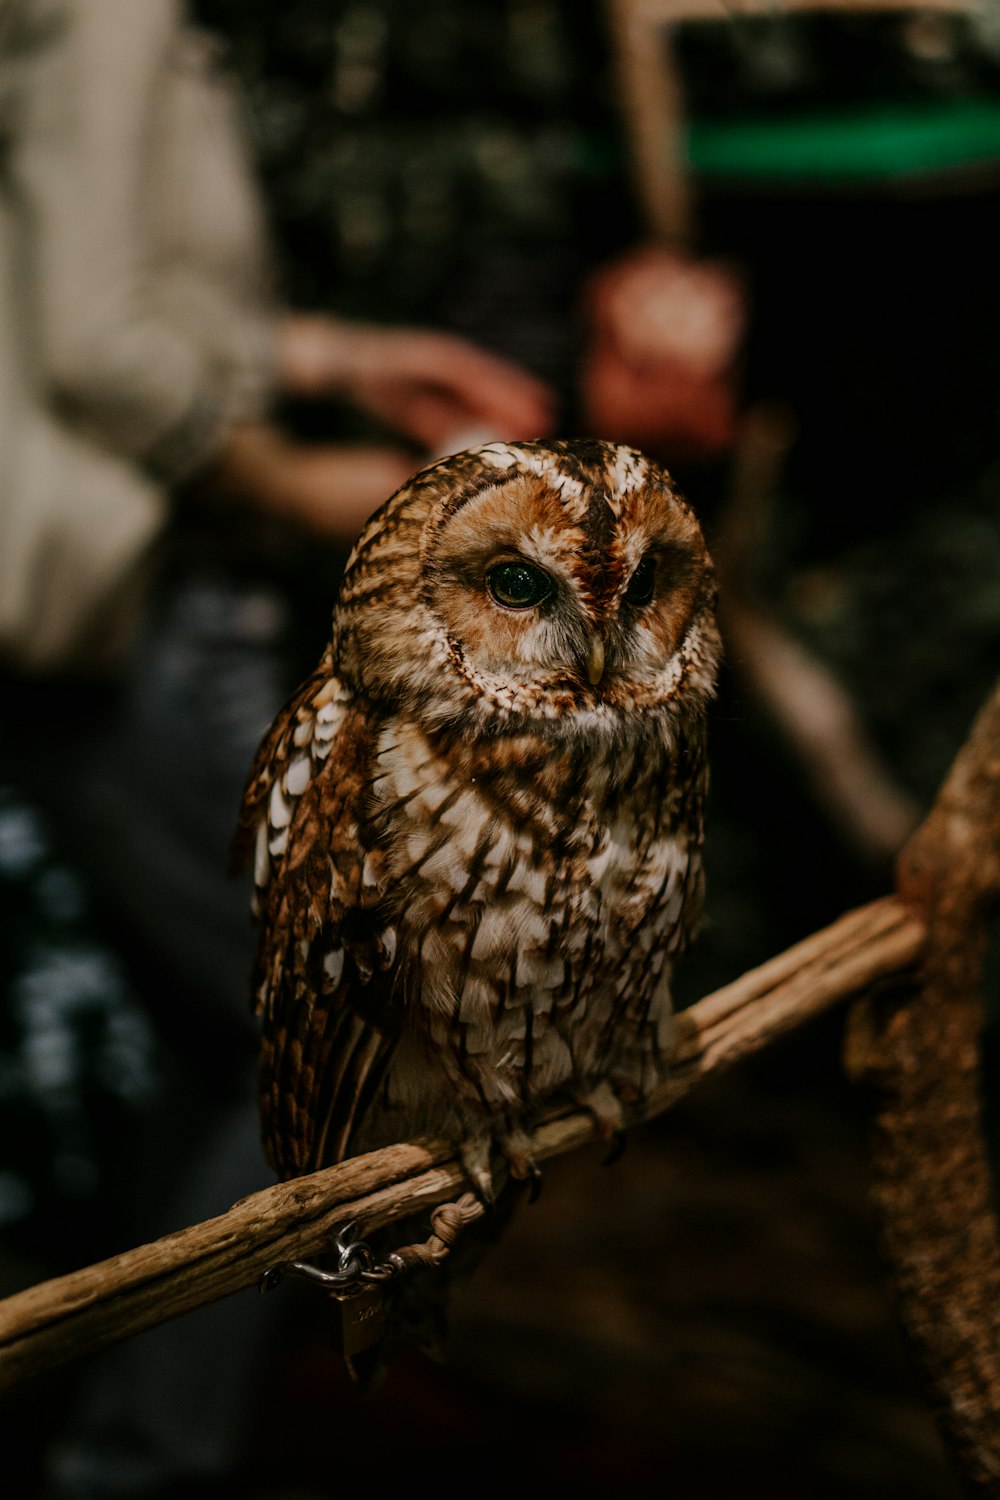 an owl sitting on a stick in front of a person